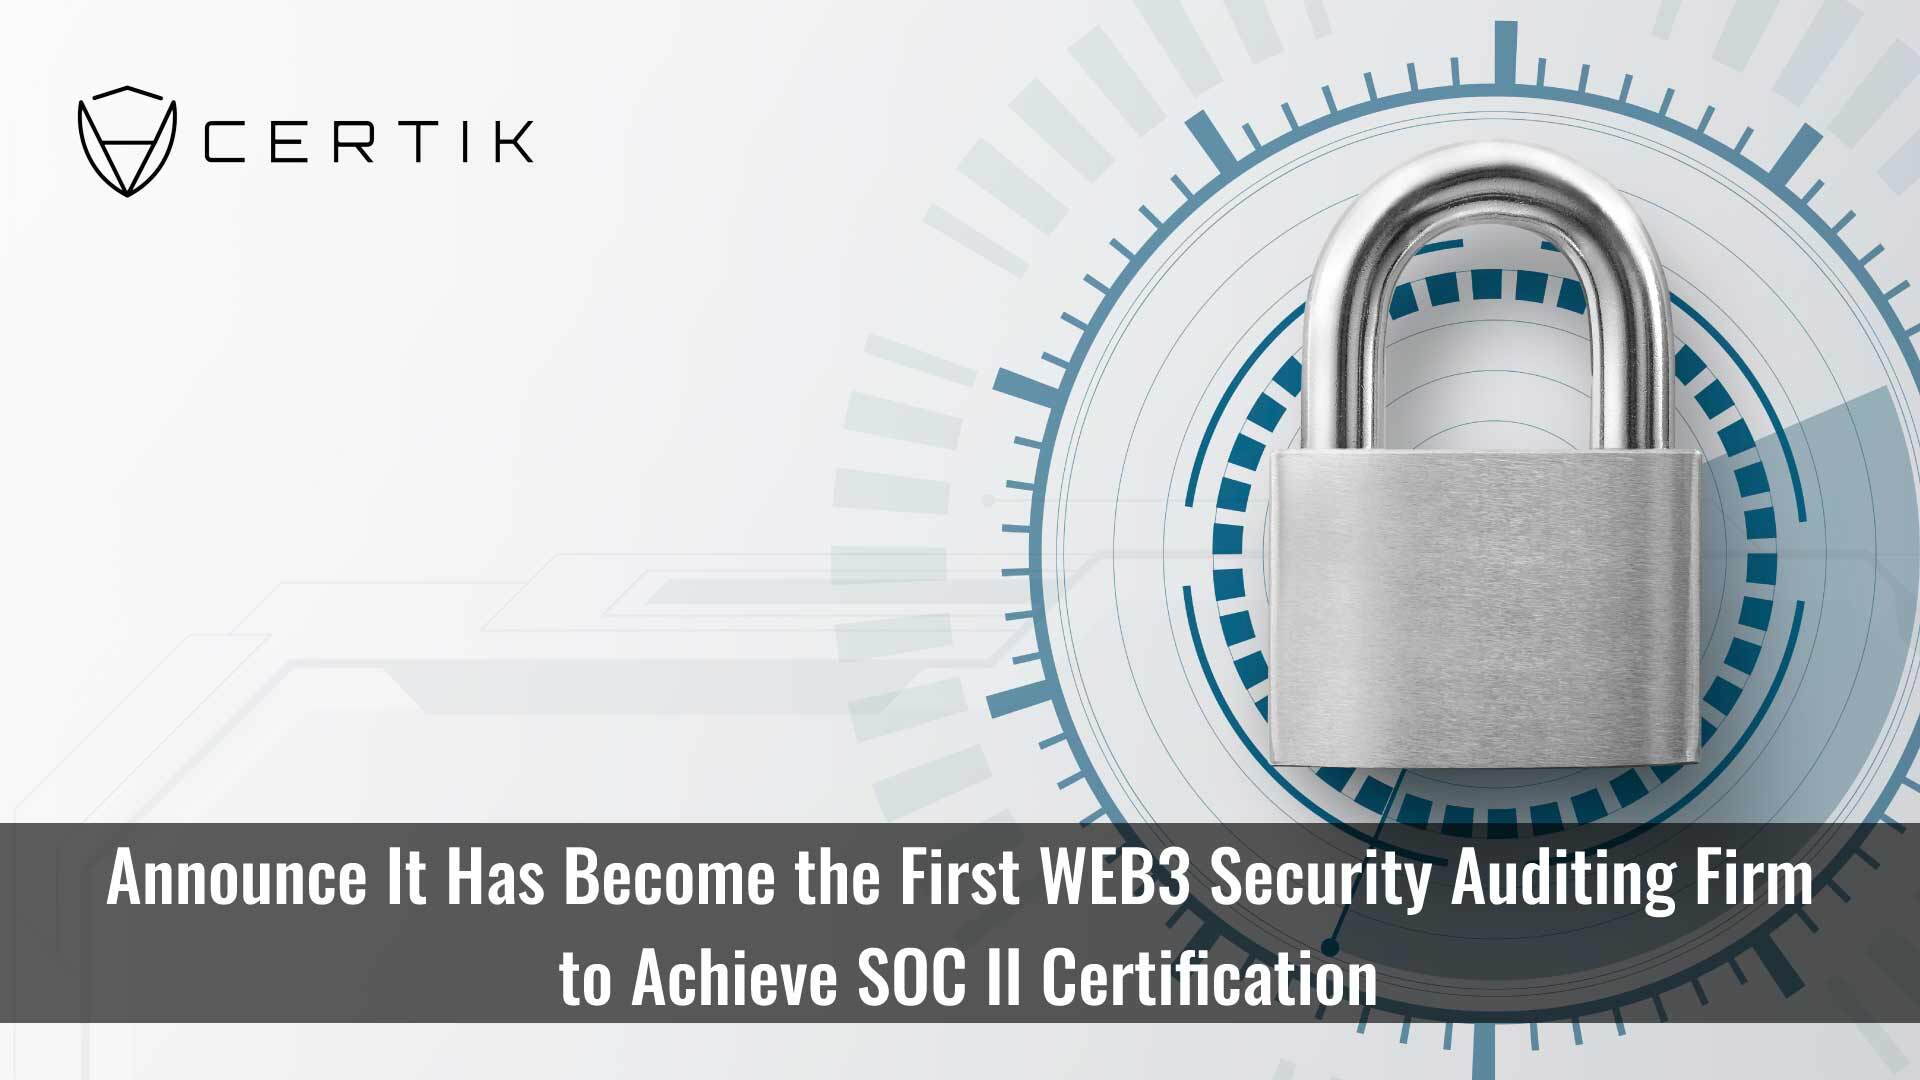 CertiK Becomes the First Web3 Security Auditing Firm to Achieve SOC II Type I Compliance